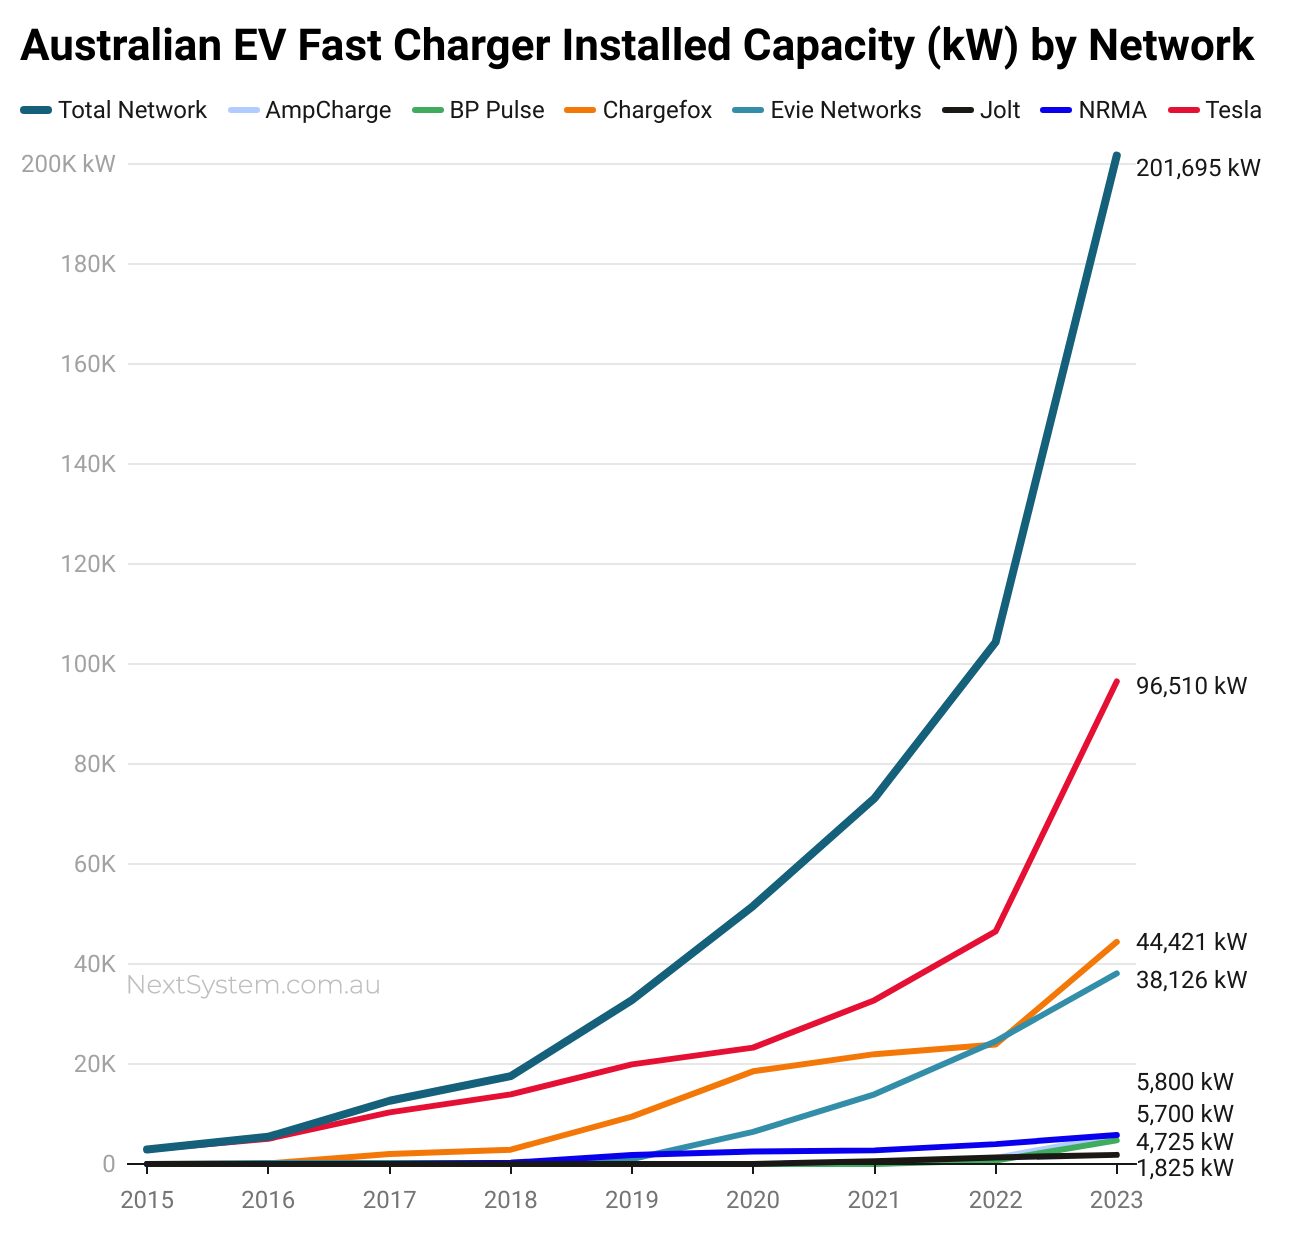 Australian EV Fast Charger Installed Capacity (kW) by Network